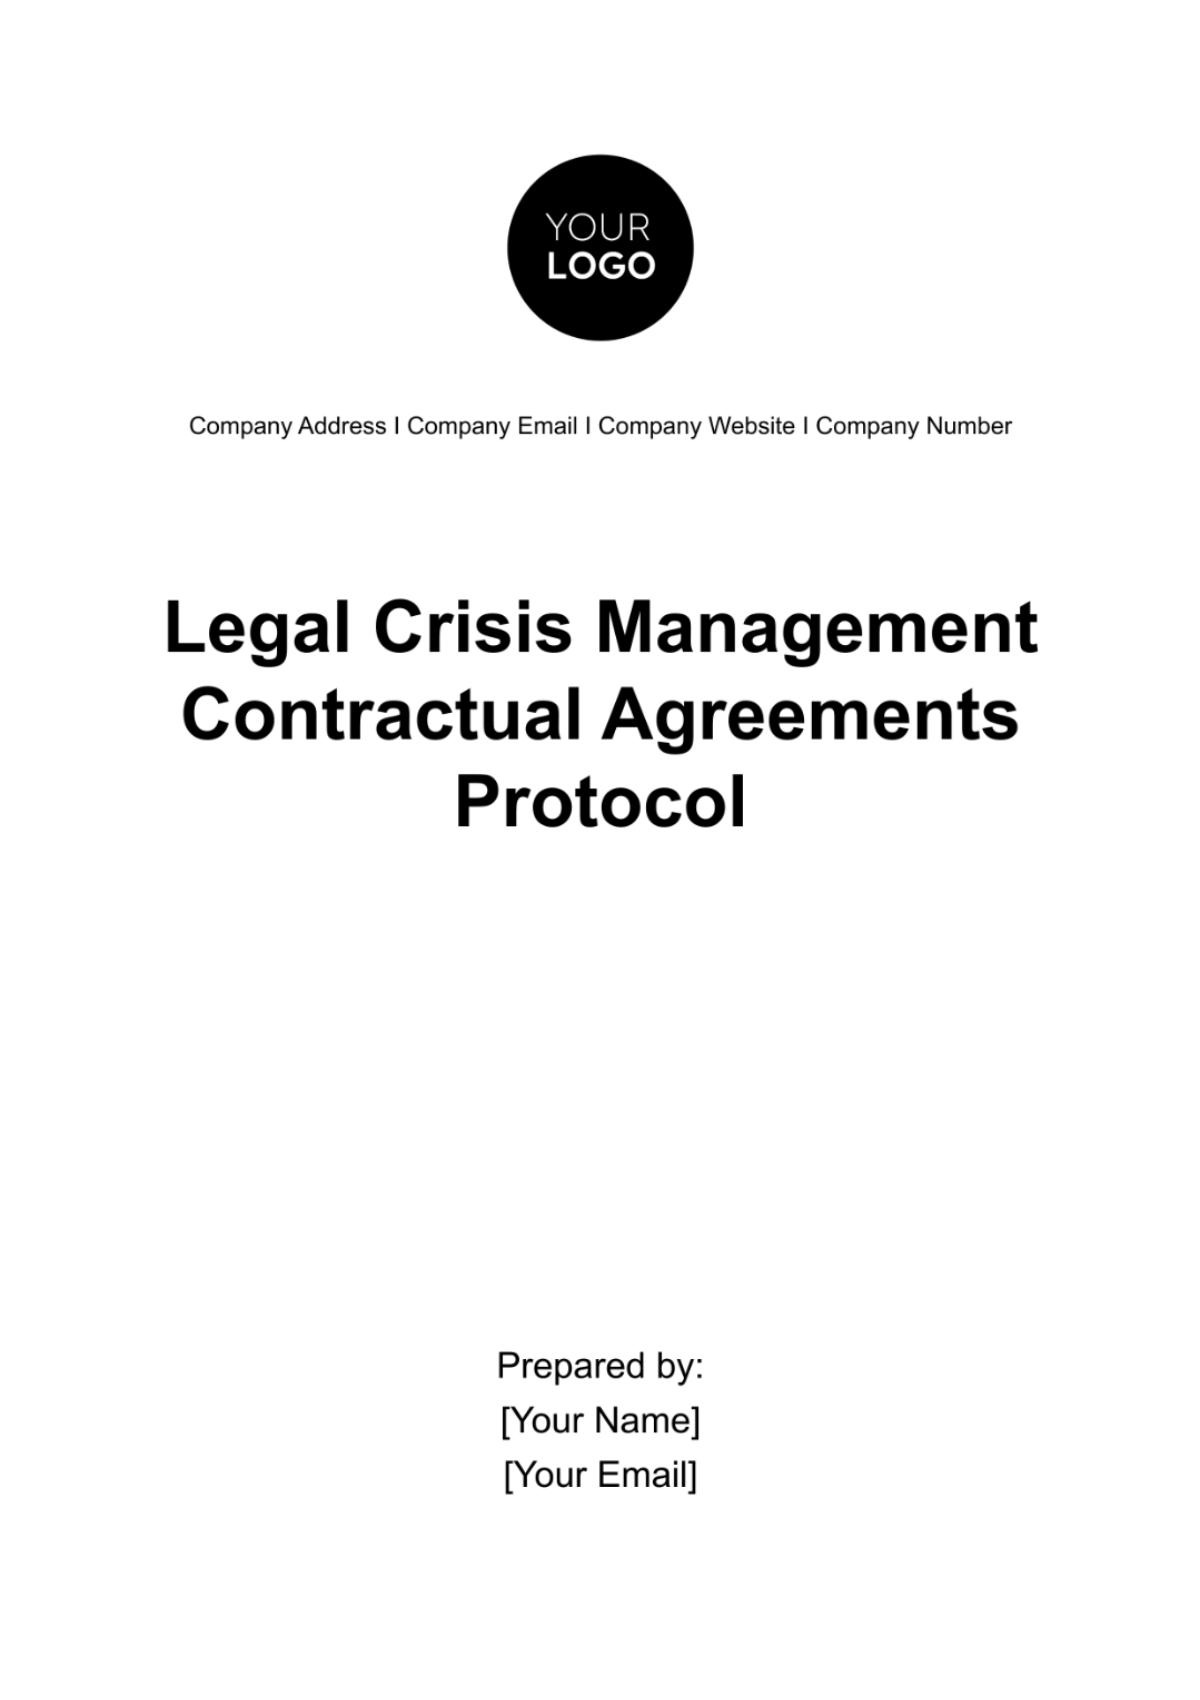 Legal Crisis Management Contractual Agreements Protocol Template